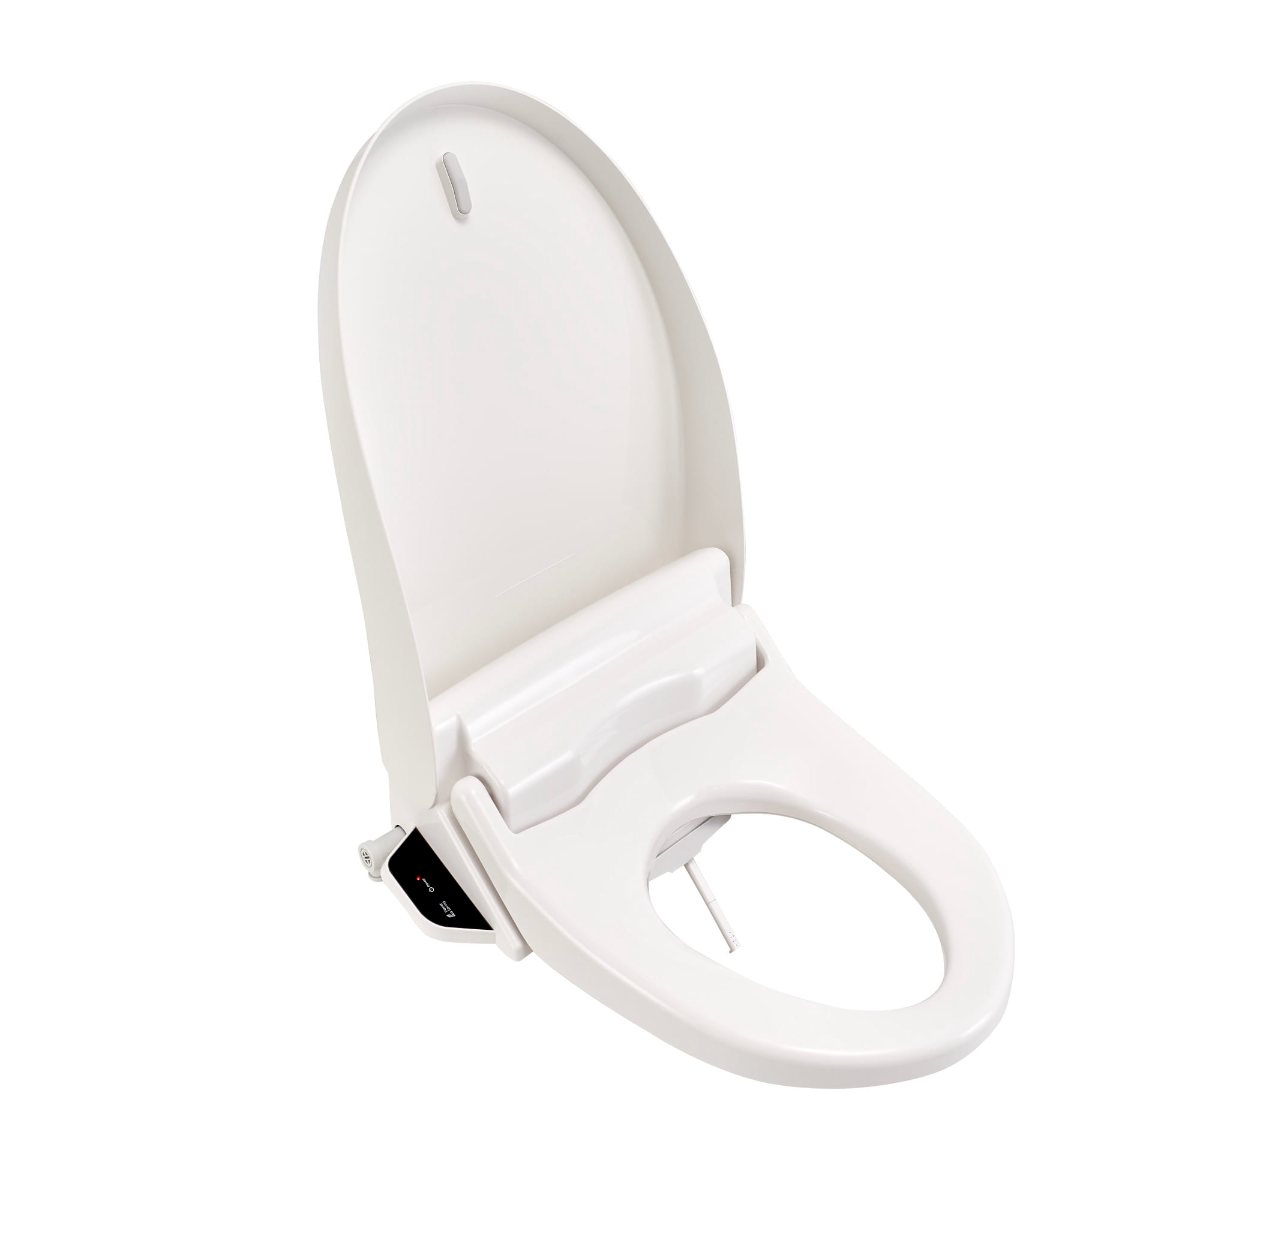 American Standard Advanced Clean 2.0 Electric SpaLet Bidet Seat With Remote Operation - Elongated